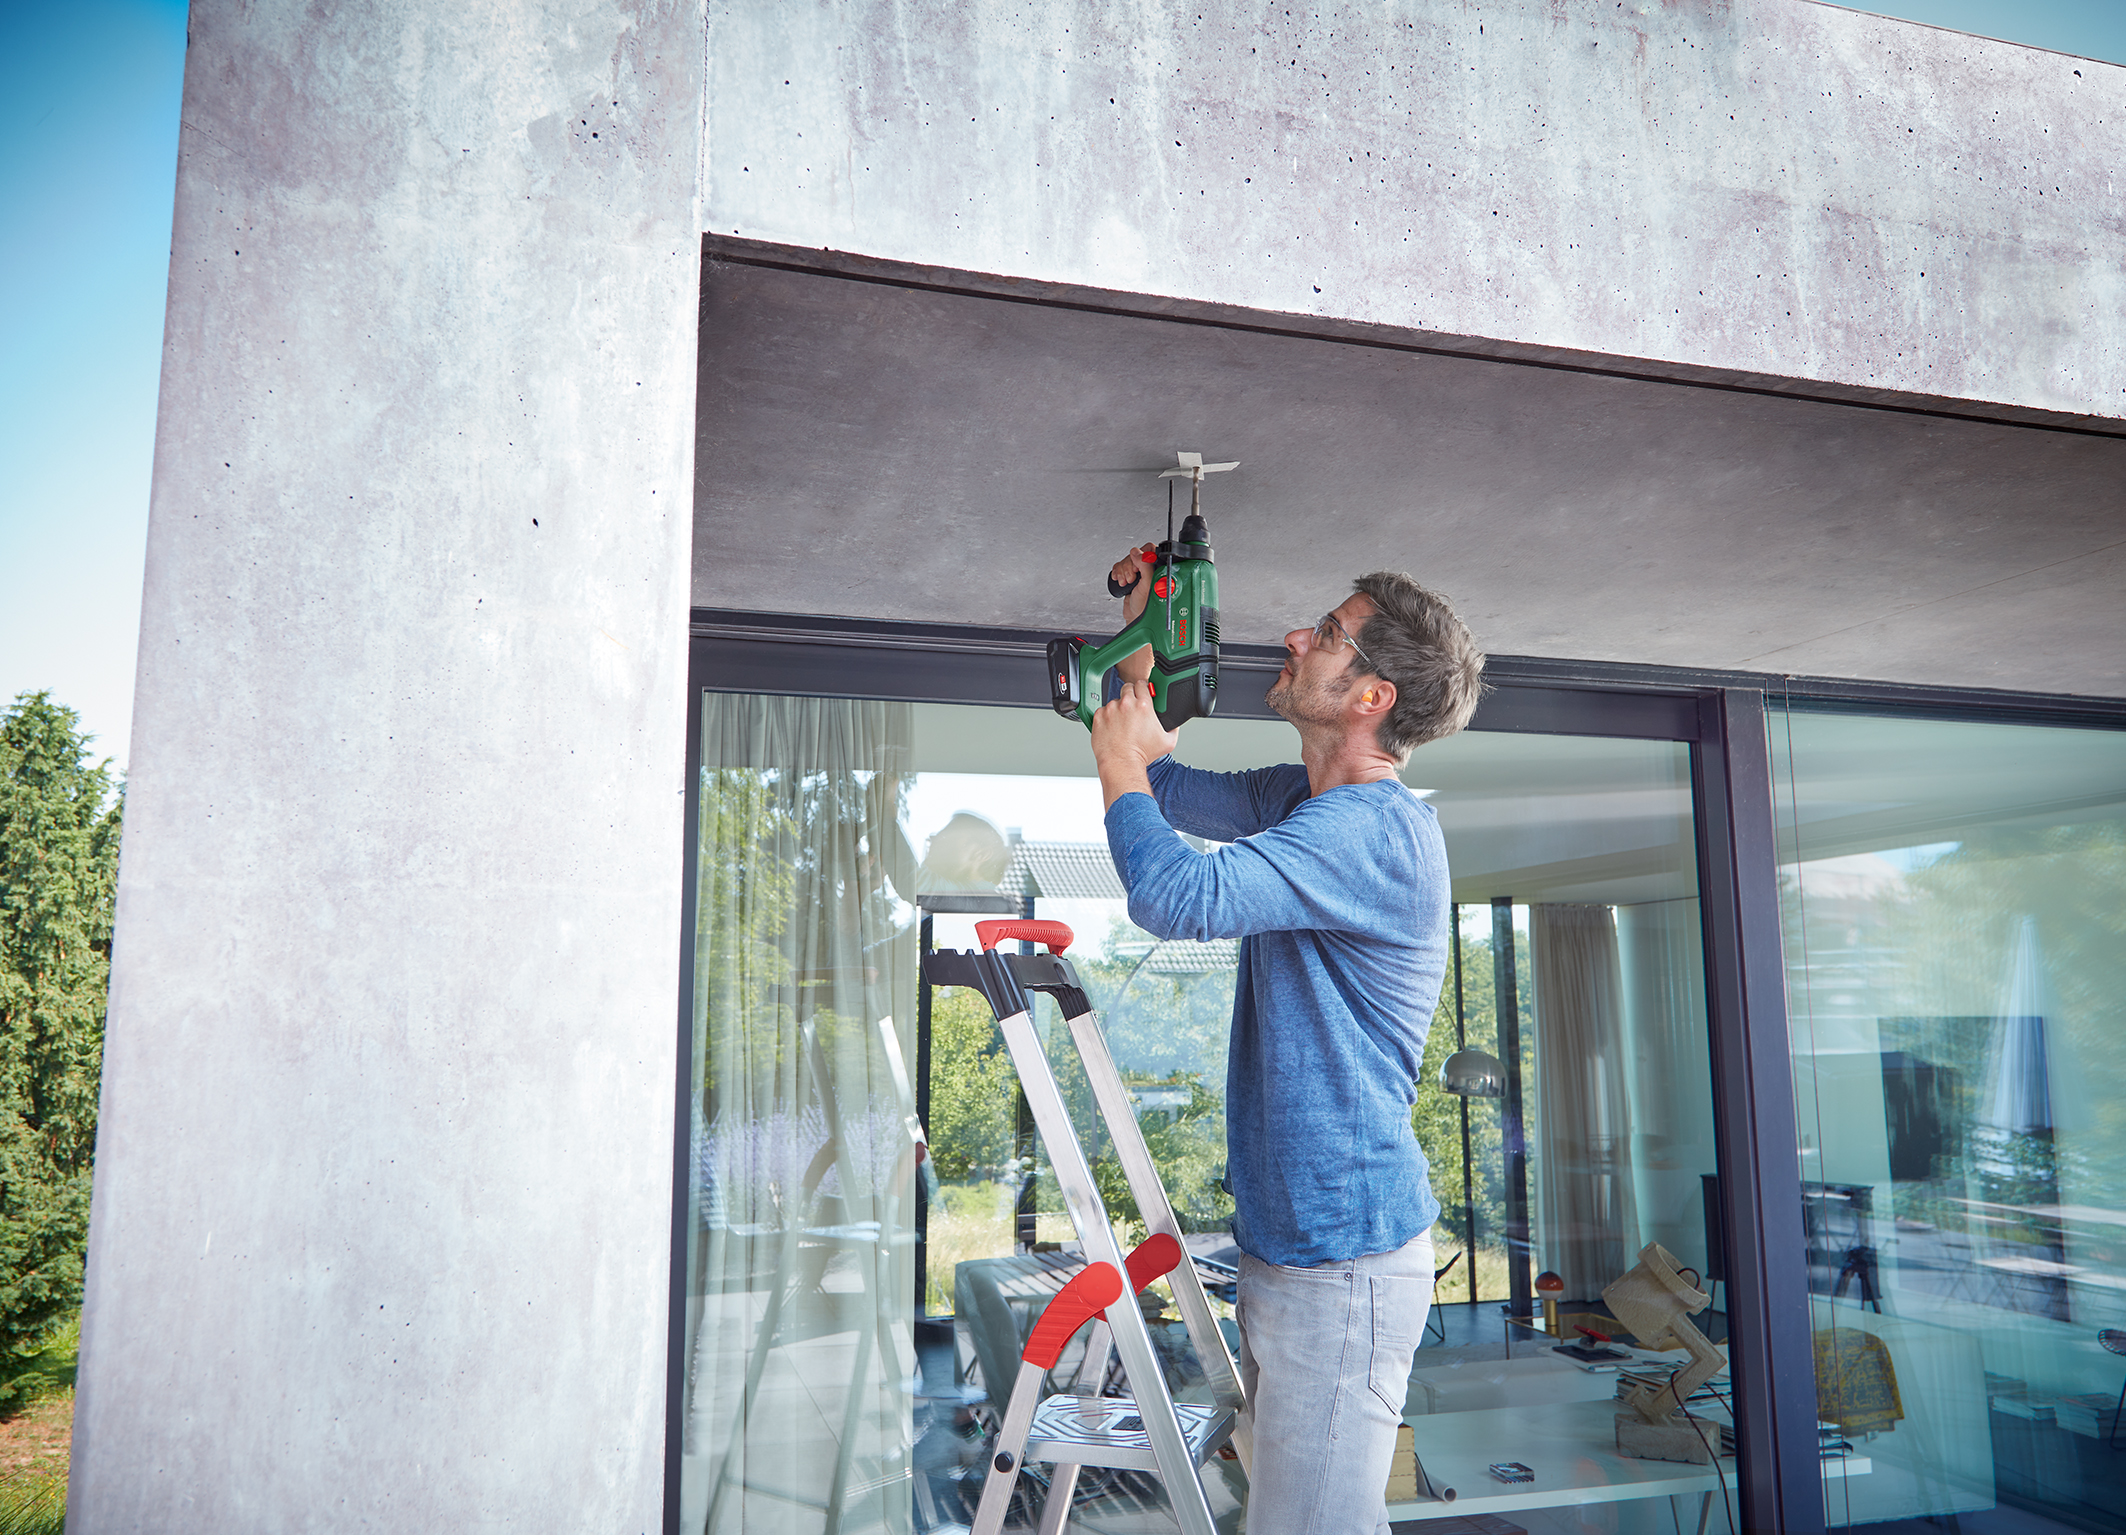 High impact energy meets low vibrations: Cordless rotary hammer UniversalHammer 18V from Bosch for DIYers